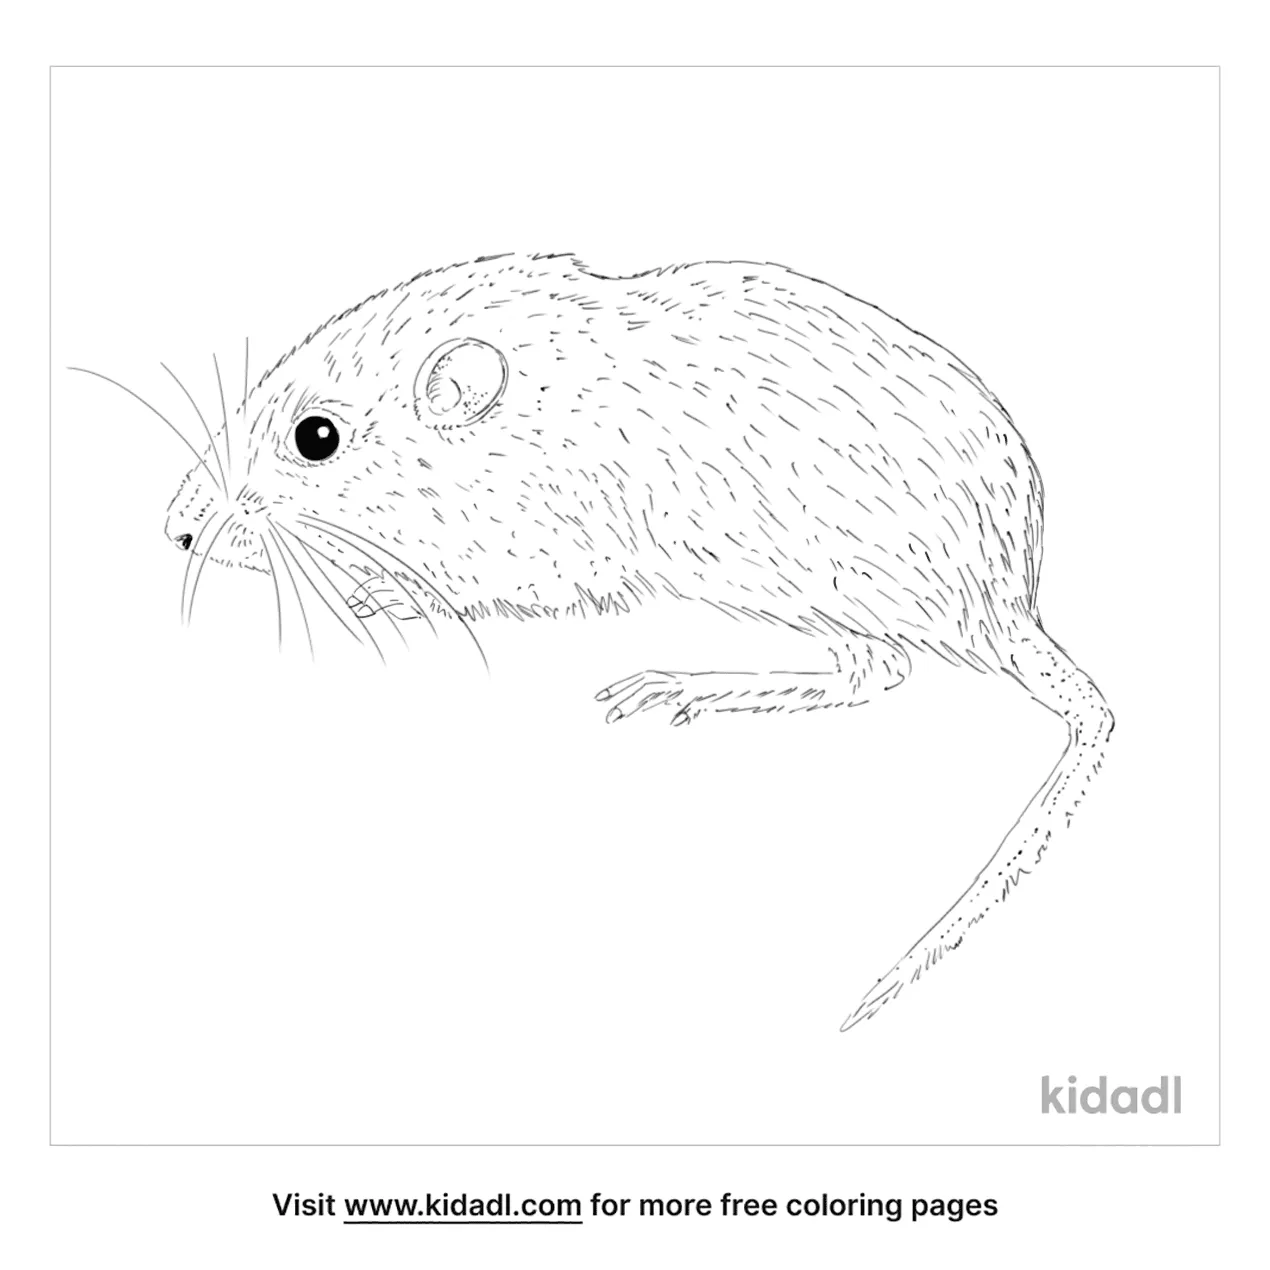 triple Production Institute Free Little Pocket Mouse Coloring Page | Coloring Page Printables | Kidadl